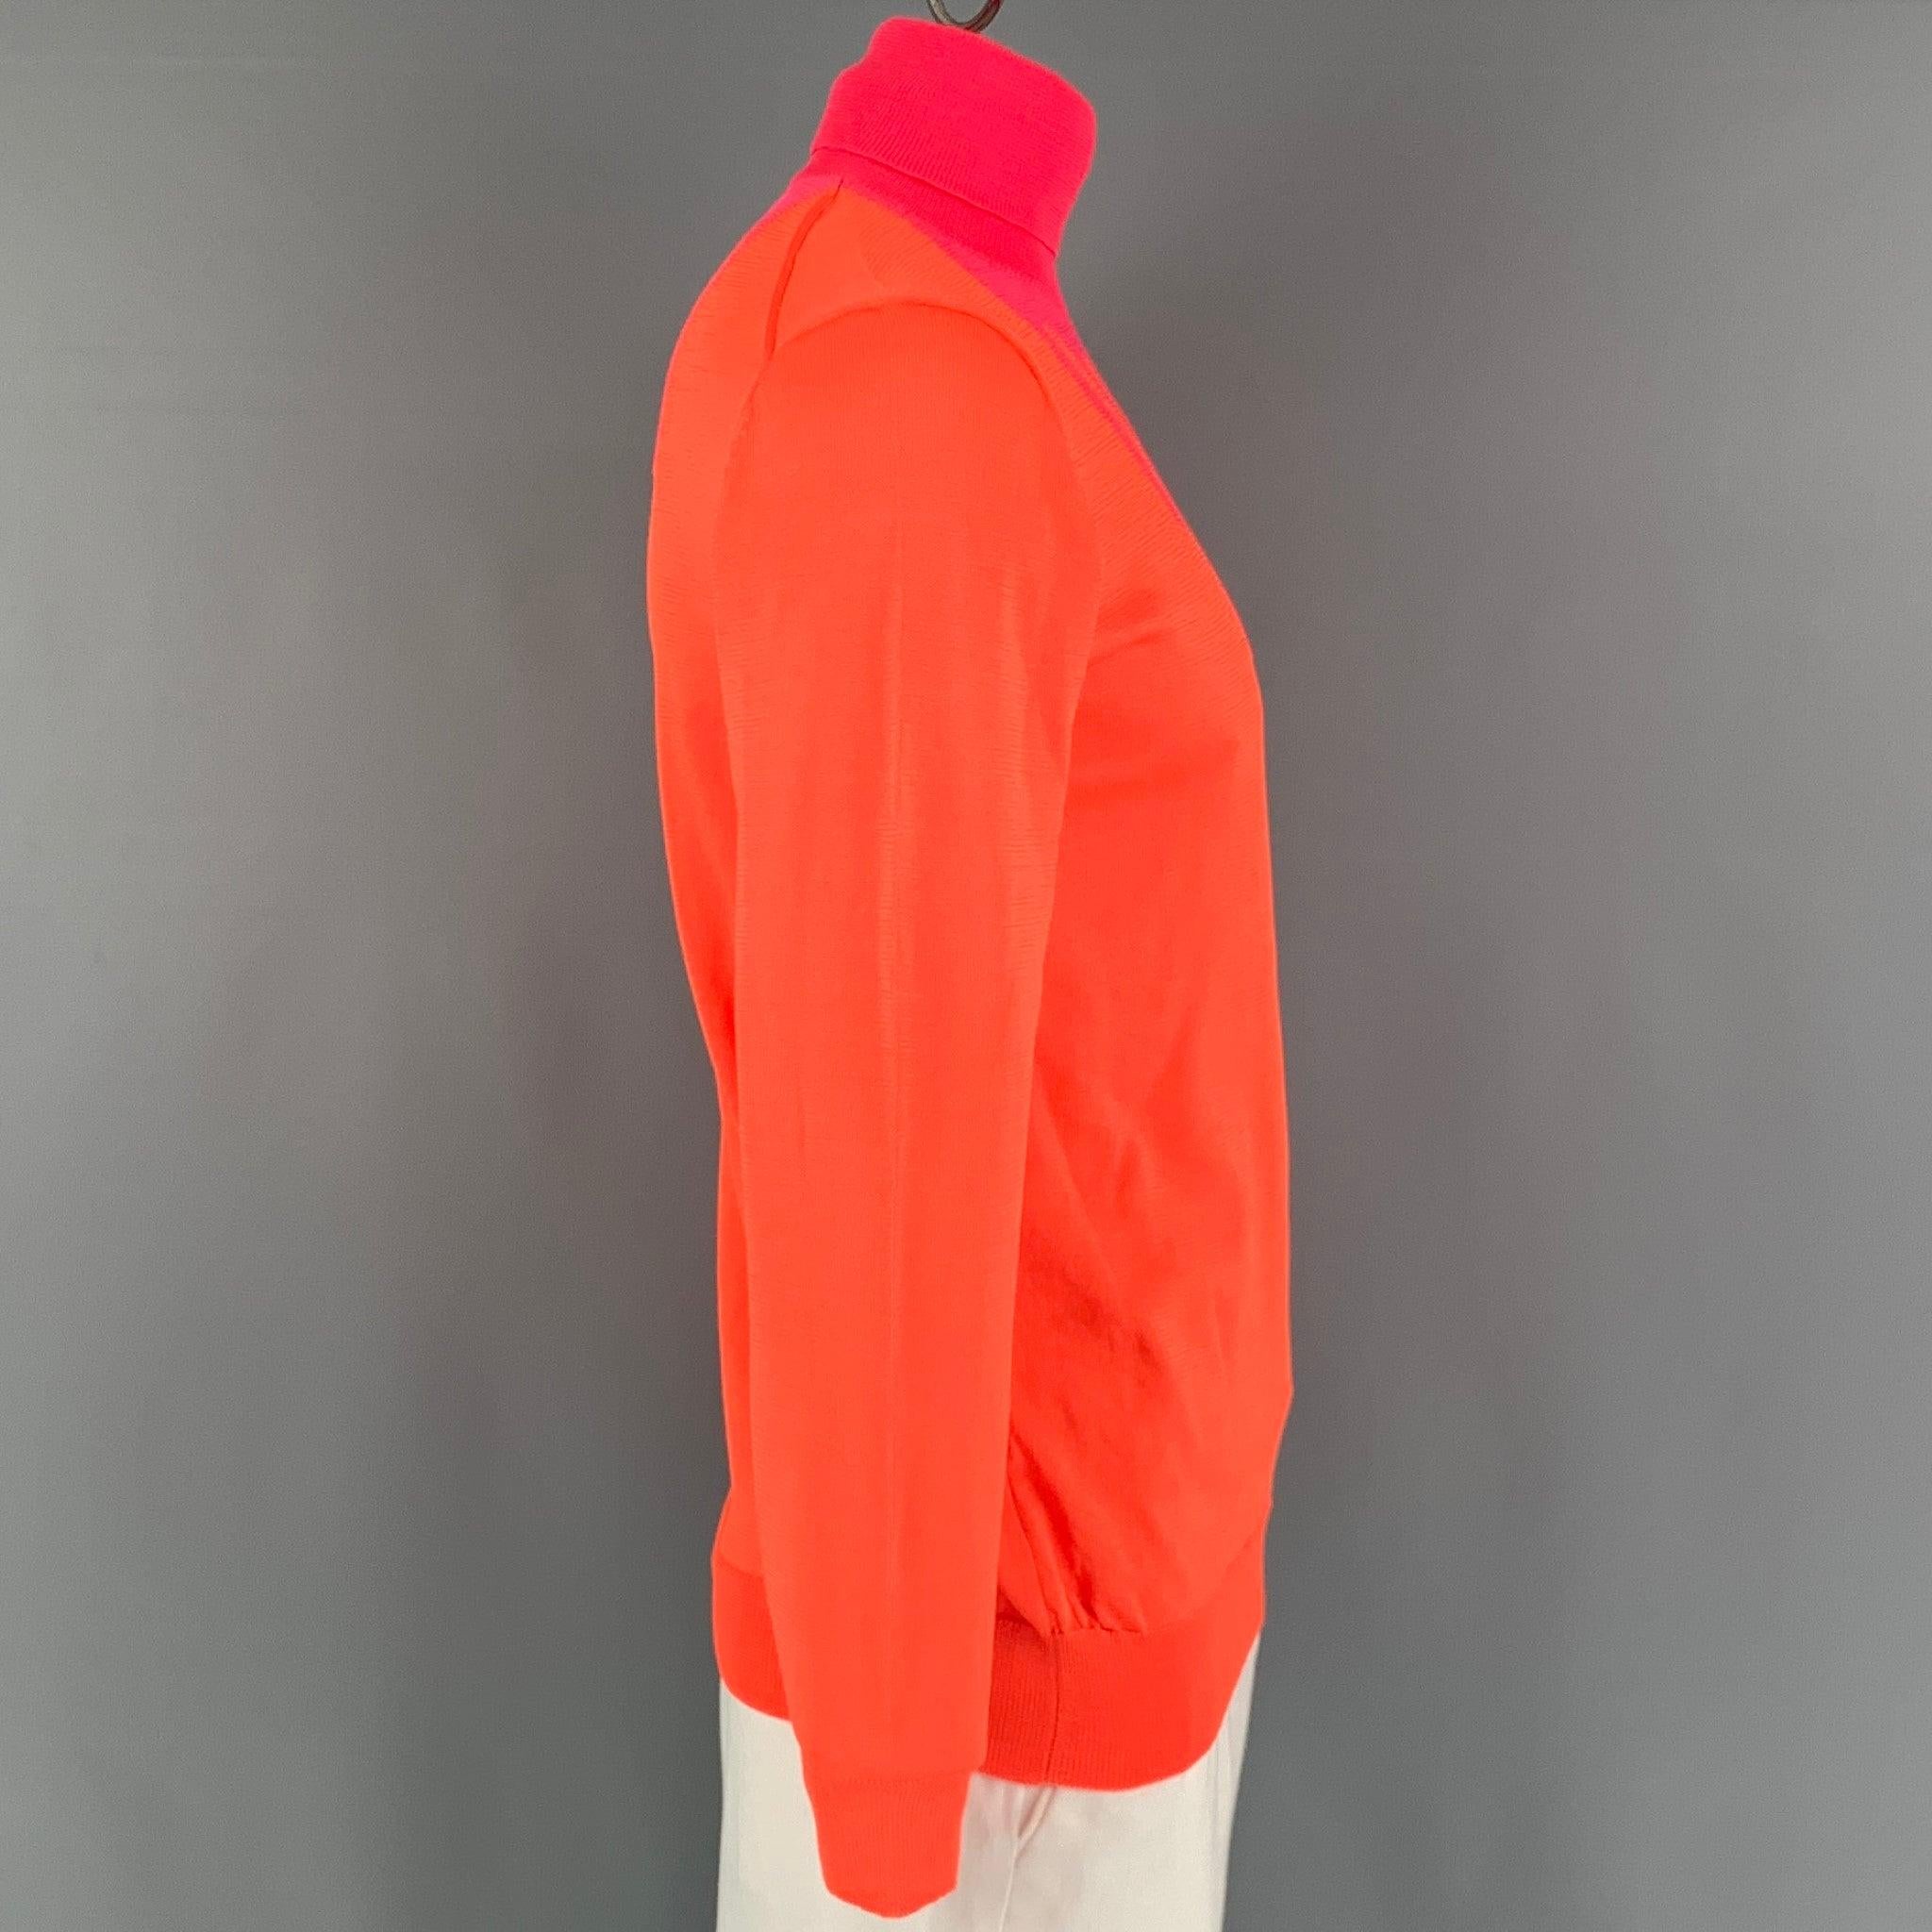 WALTER VAN BEIRENDONCK Fall-Winter 2019 pullover comes in a orange and pink knitted material featuring a turtleneck. Made in Belgium. Excellent Pre-Owned Condition. 

Marked:   XXL 

Measurements: 
 
Shoulder: 19.5 inches Chest: 44 inches Sleeve: 26